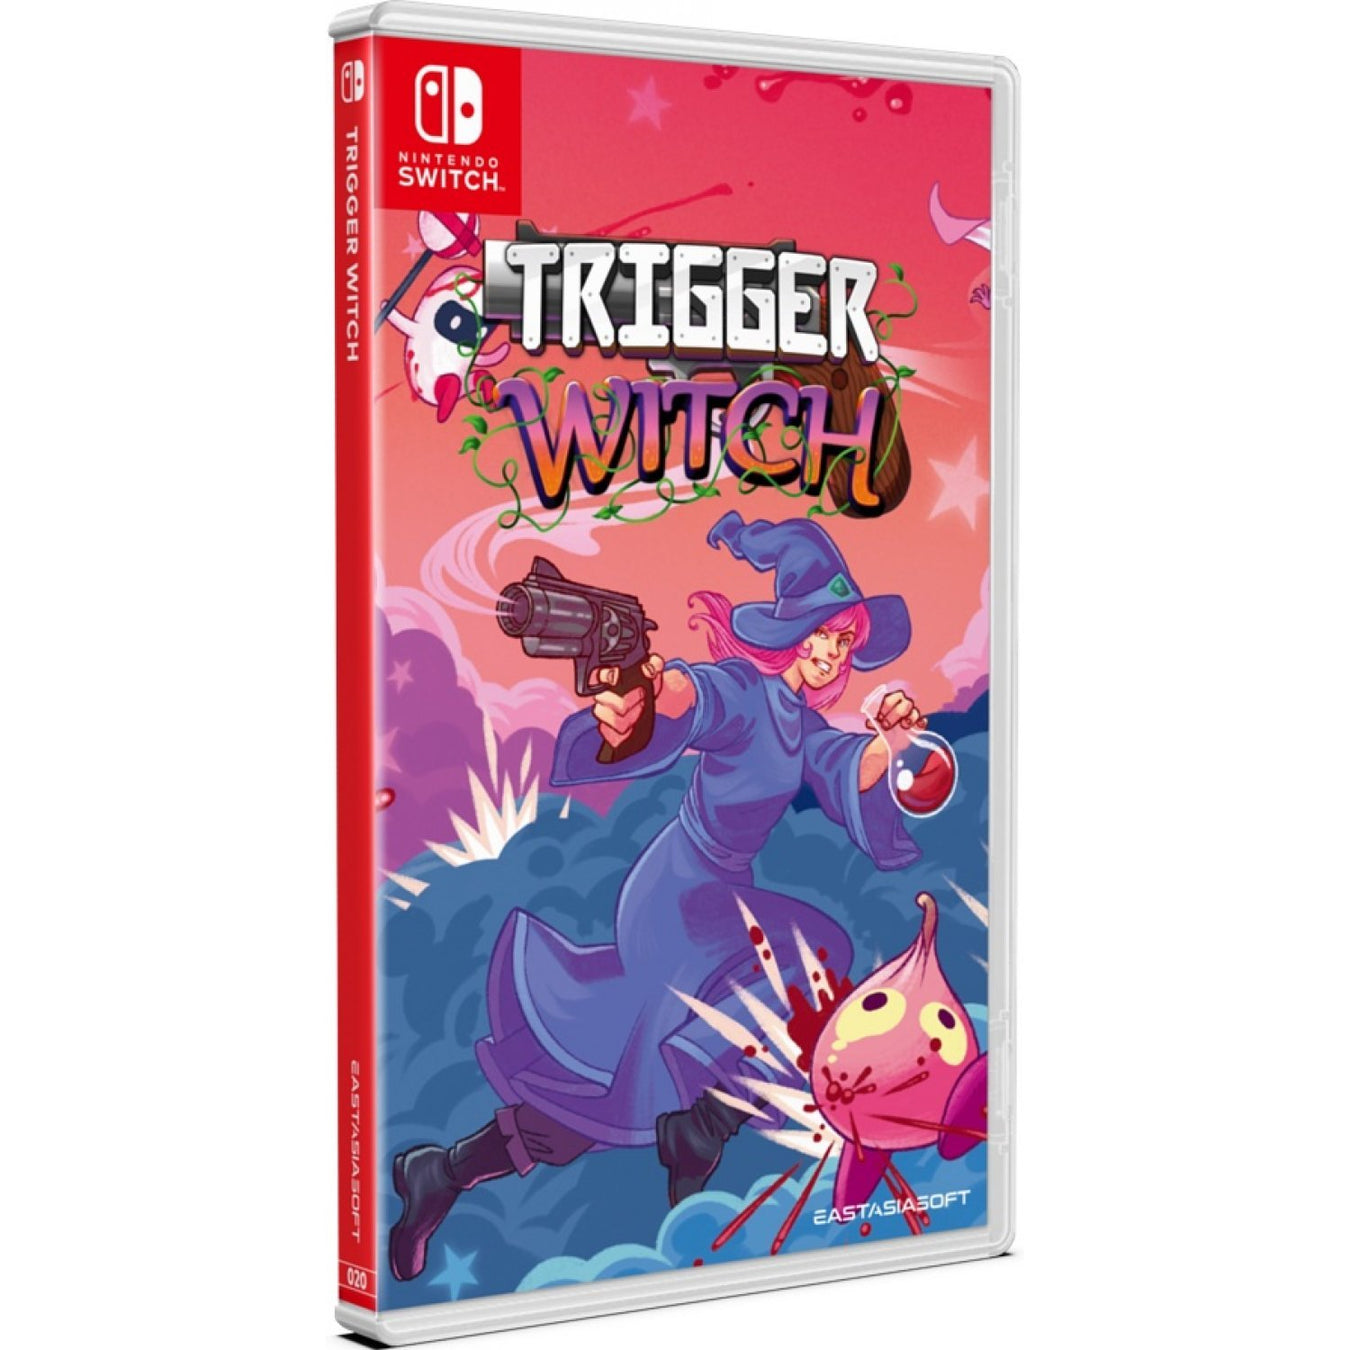 TRIGGER WITCH